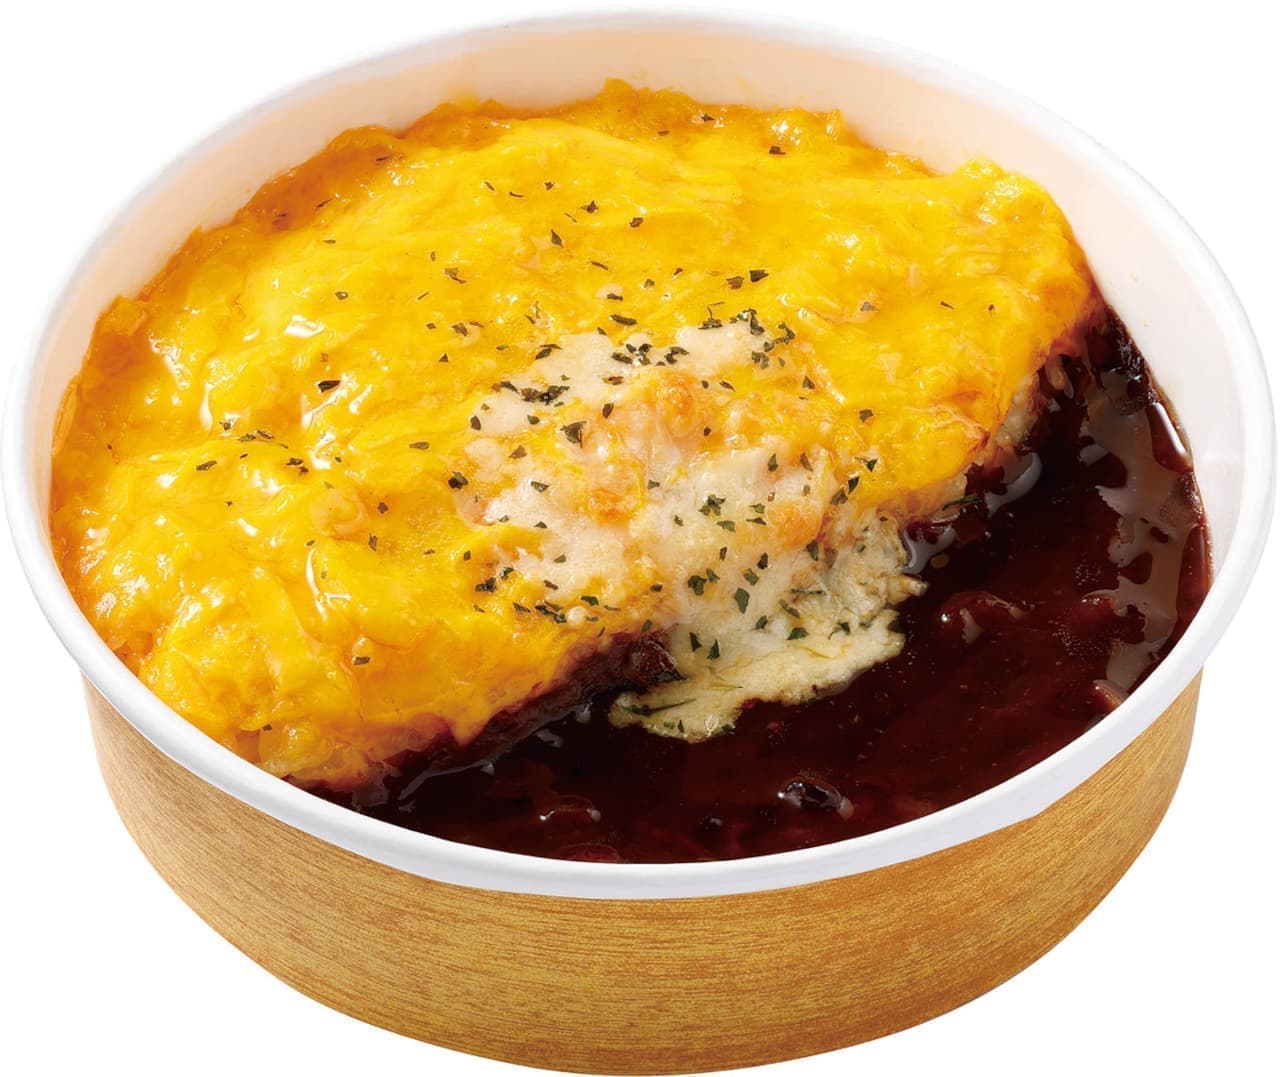 Ministop "Butter-Scented Melty Egg Hayashi Doria" (Hayashi Doria with Butter and Eggs)